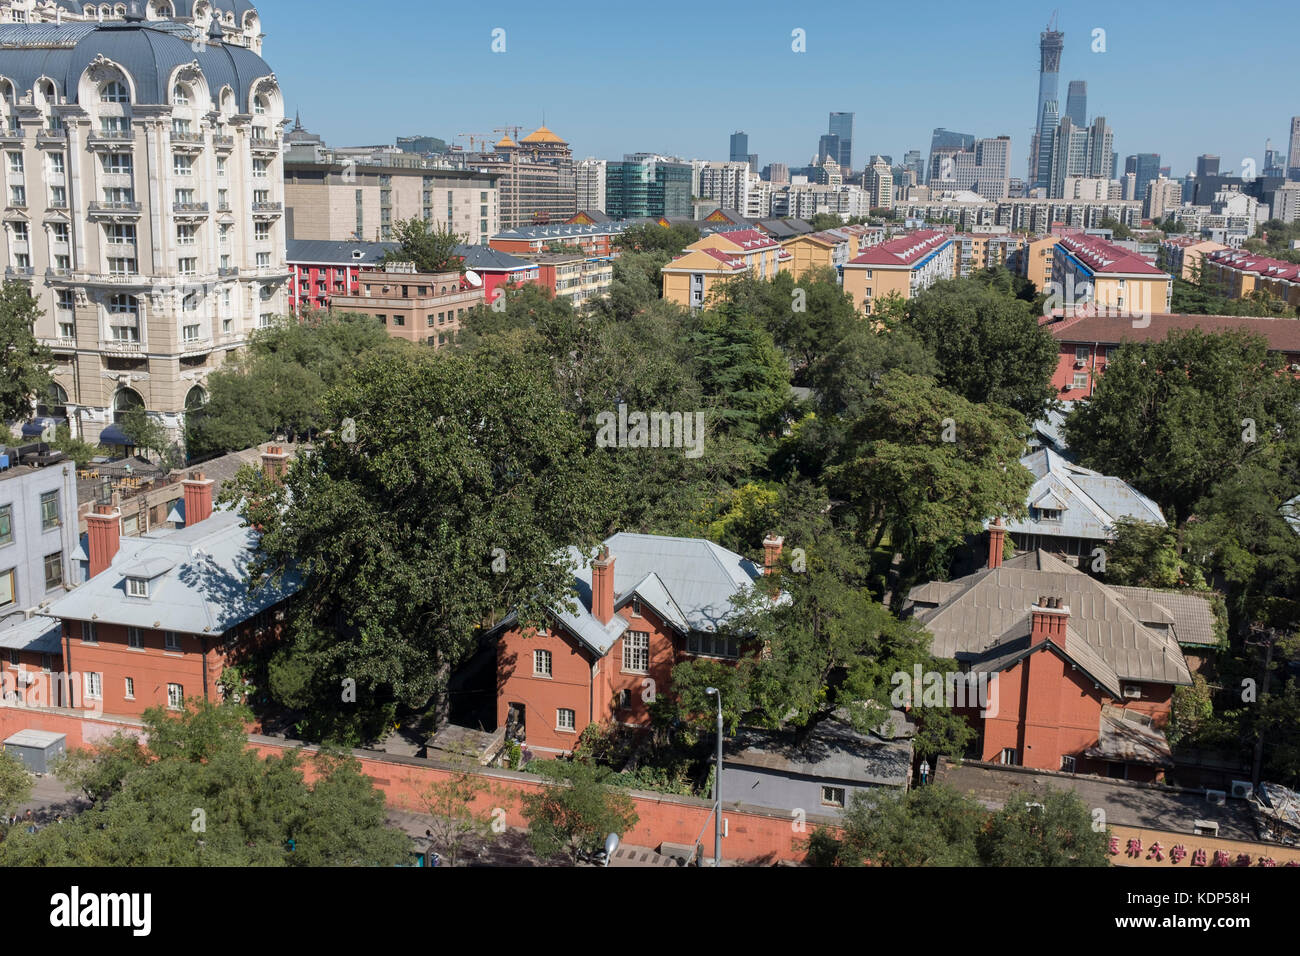 Concord Hospital old villas in Beijing, China. Stock Photo